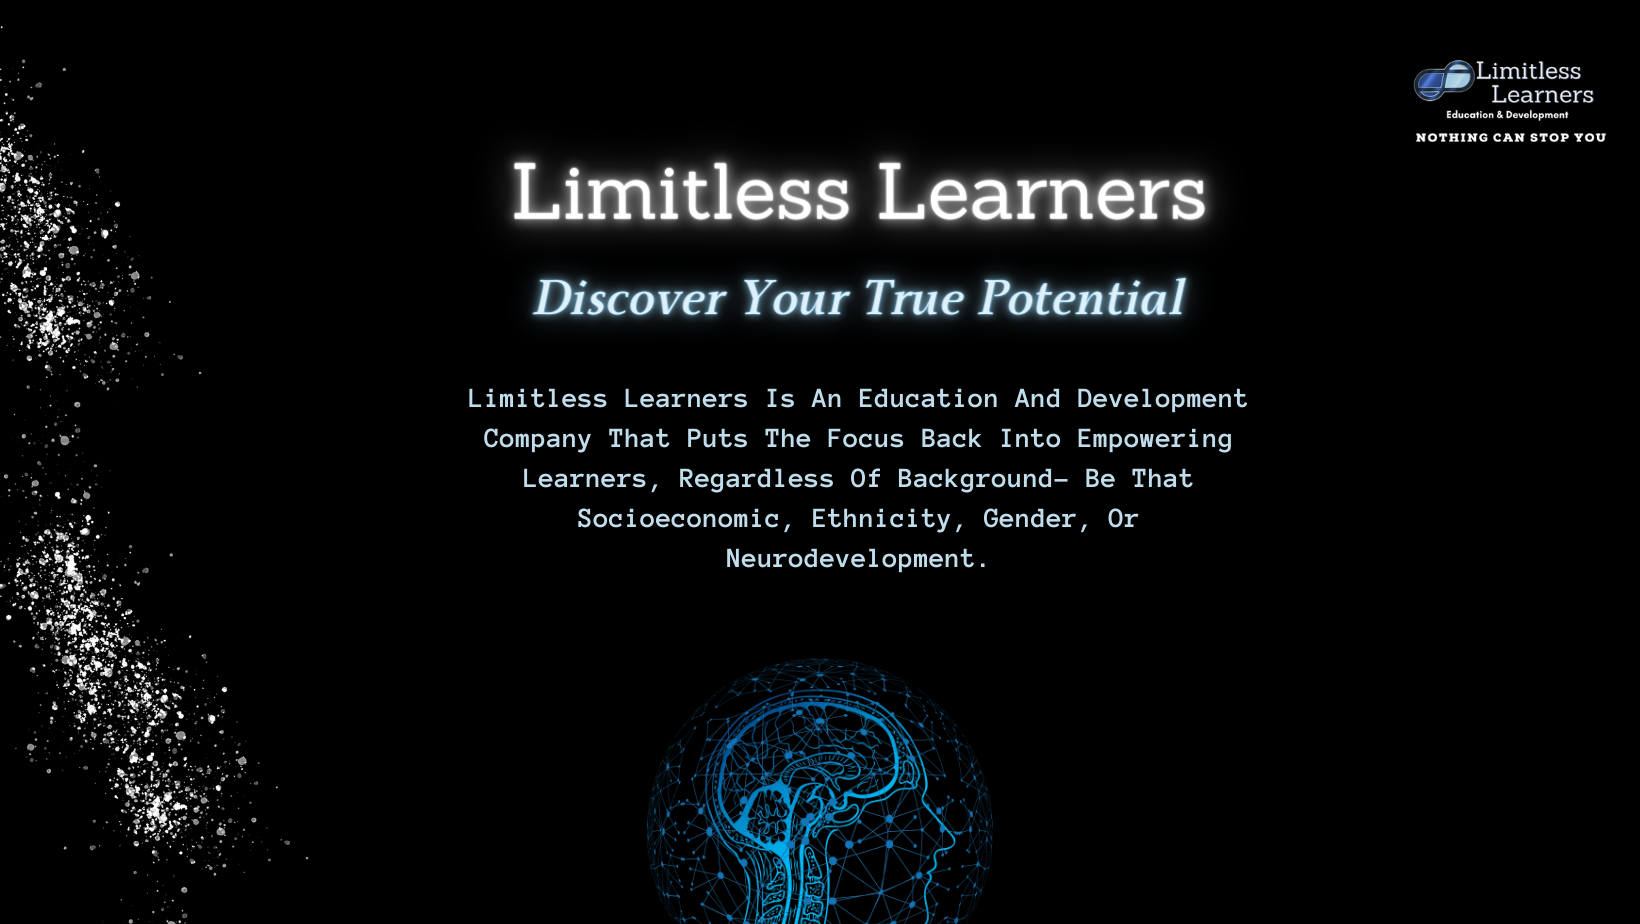 Limitless Learners